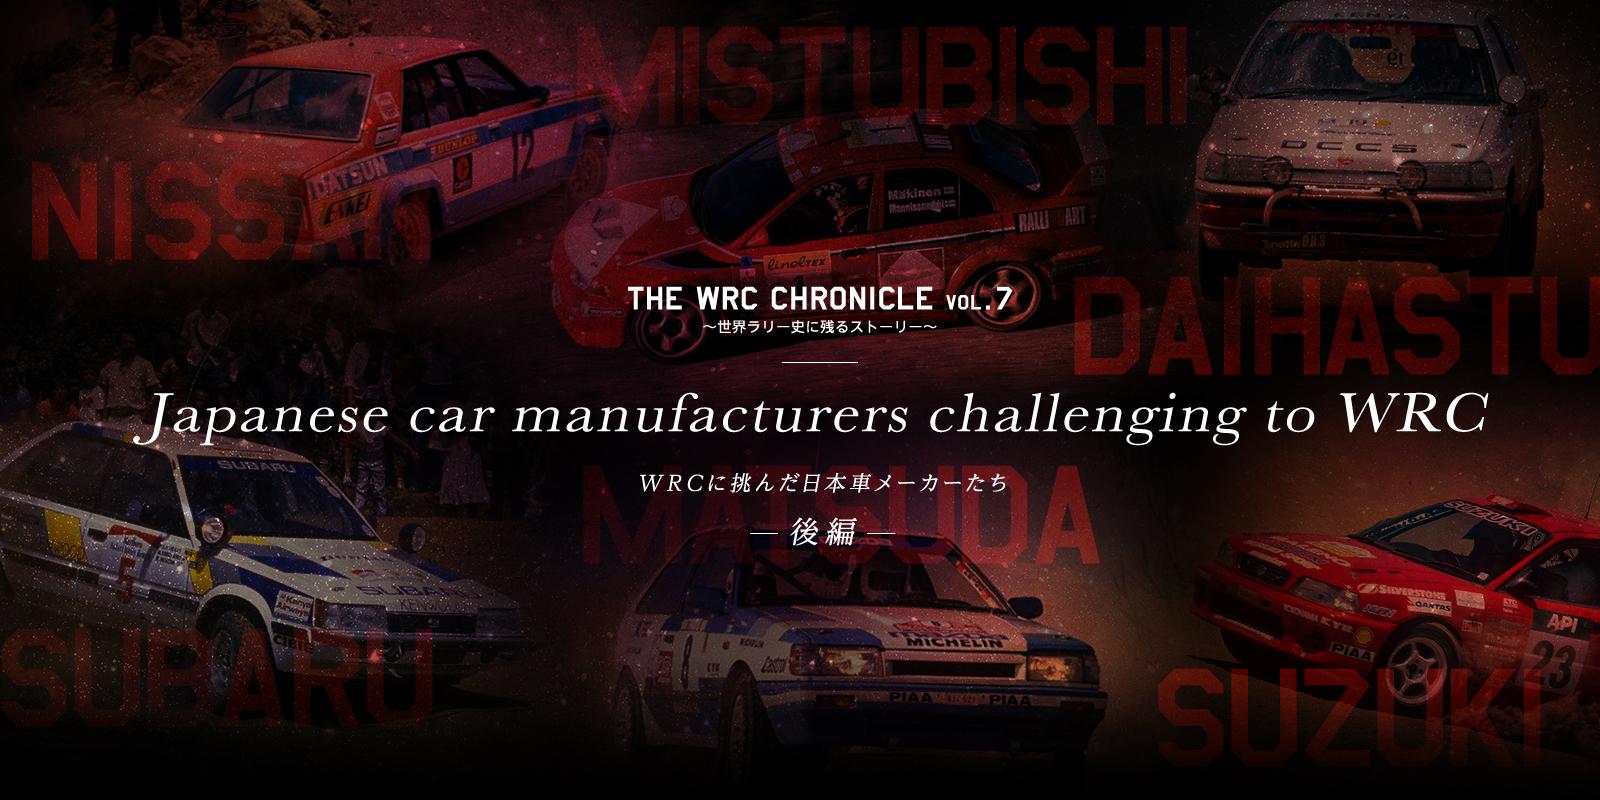 Japanese car manufacturers challenging to WRC 〜WRCに挑んだ日本車メーカーたち 後編〜 | The WRC Chronicle vol.6